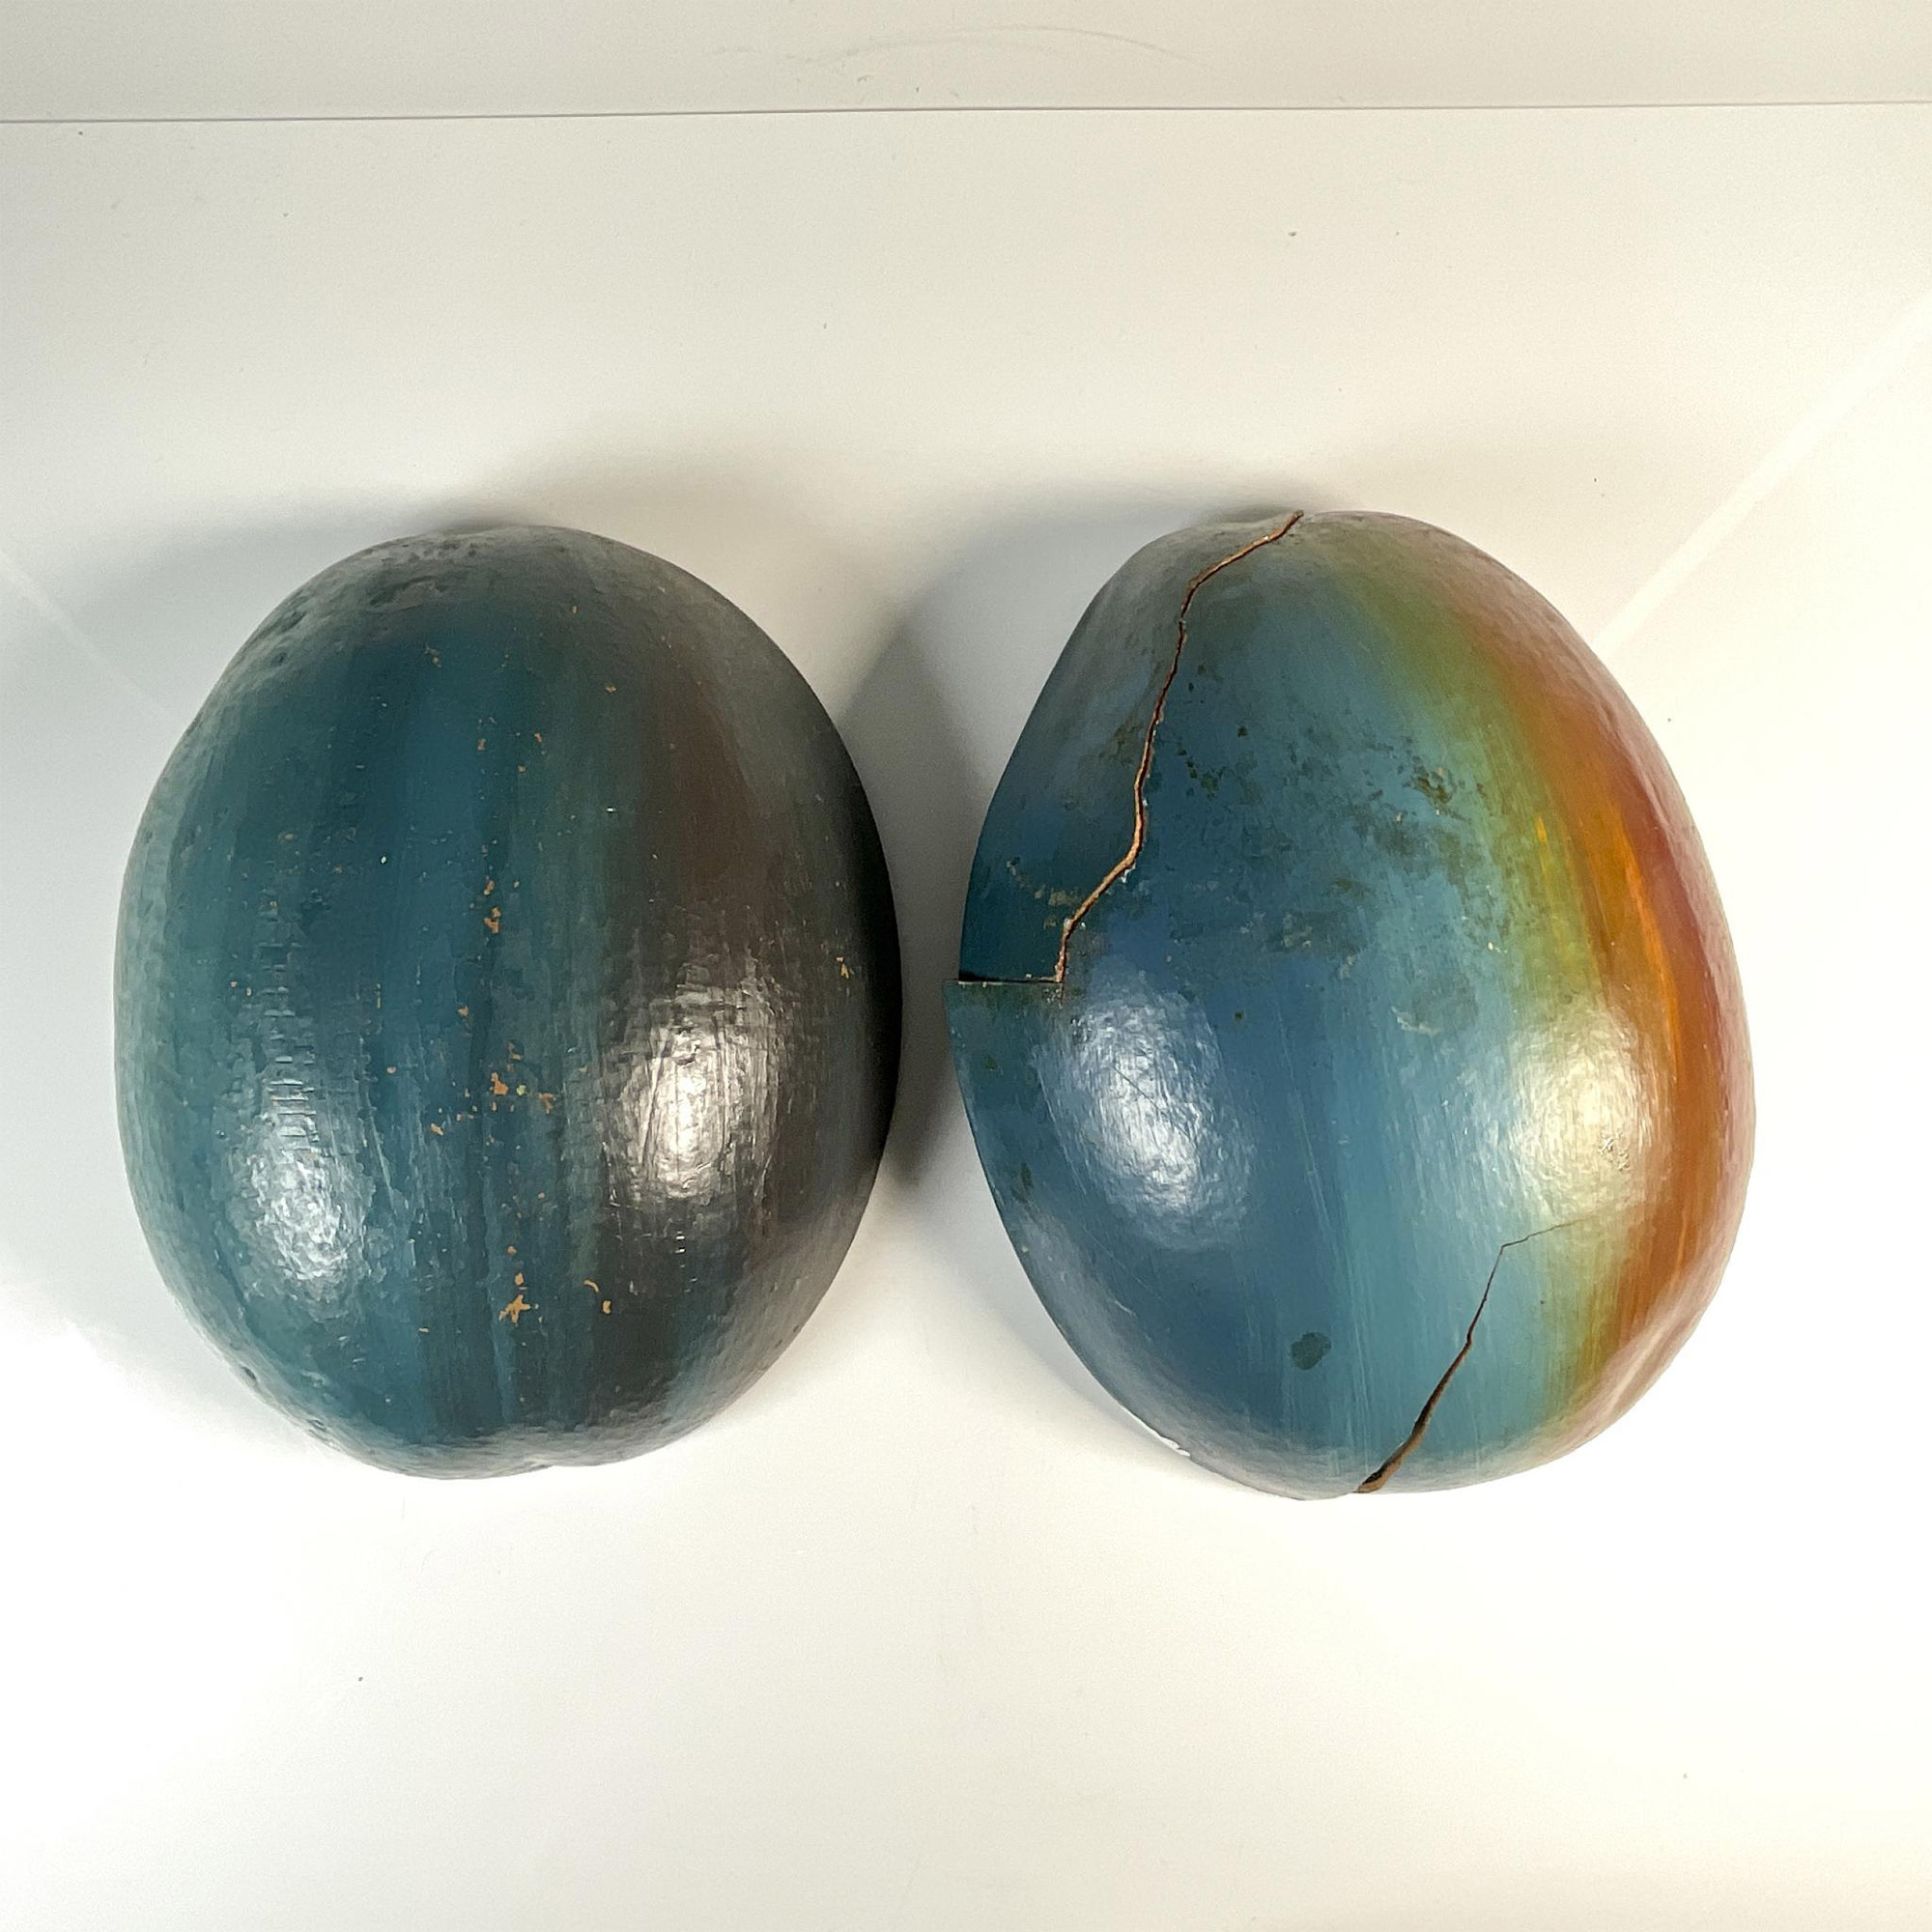 Andre Pierre (Attr.) 2pc Hand-Painted Haitian Simbi Voodoo Calabash Husk Shells, Signed - Image 3 of 3